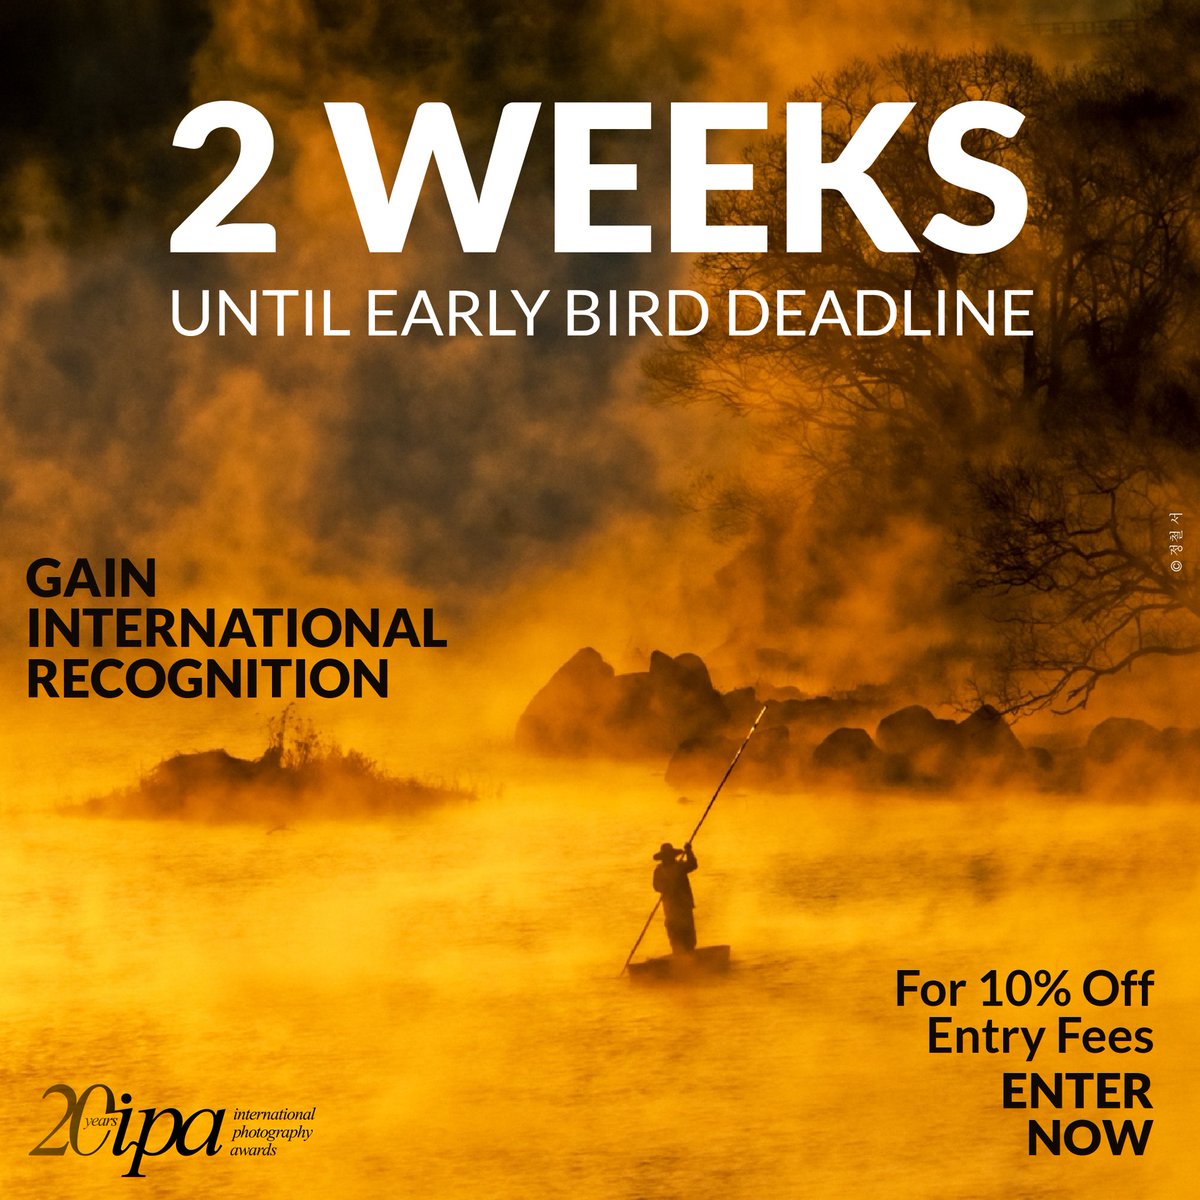 ❕Two weeks until the Early Bird Deadline - have your work exhibited among the best in the world! Submit here: photoawards.com
📸: 정철 서

#PhotoCompetition #IPhotoAwards #PhotographySouls #Photo